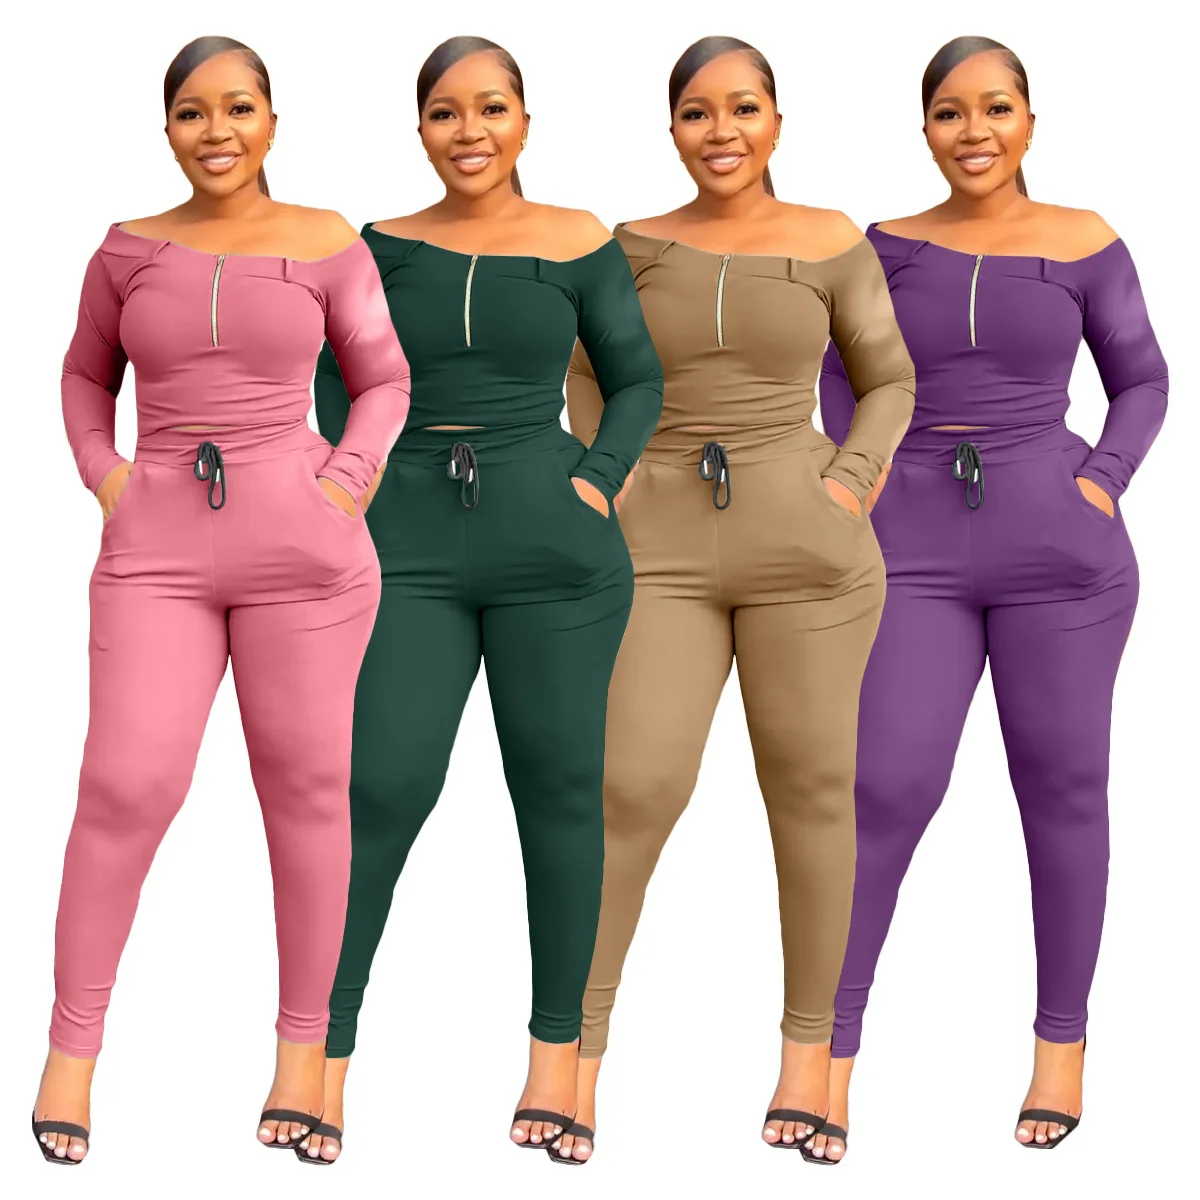 Women's Fall Solid Color Zip-Up Long Sleeve Pants Casual Sports Suit Long Sleeve Crop Top Leggings Fitness Set lw muliticolor 2 pieces cartoon letter print pants set short sleeve casual o neck tee sheath fitness leggings matching 2pc suits